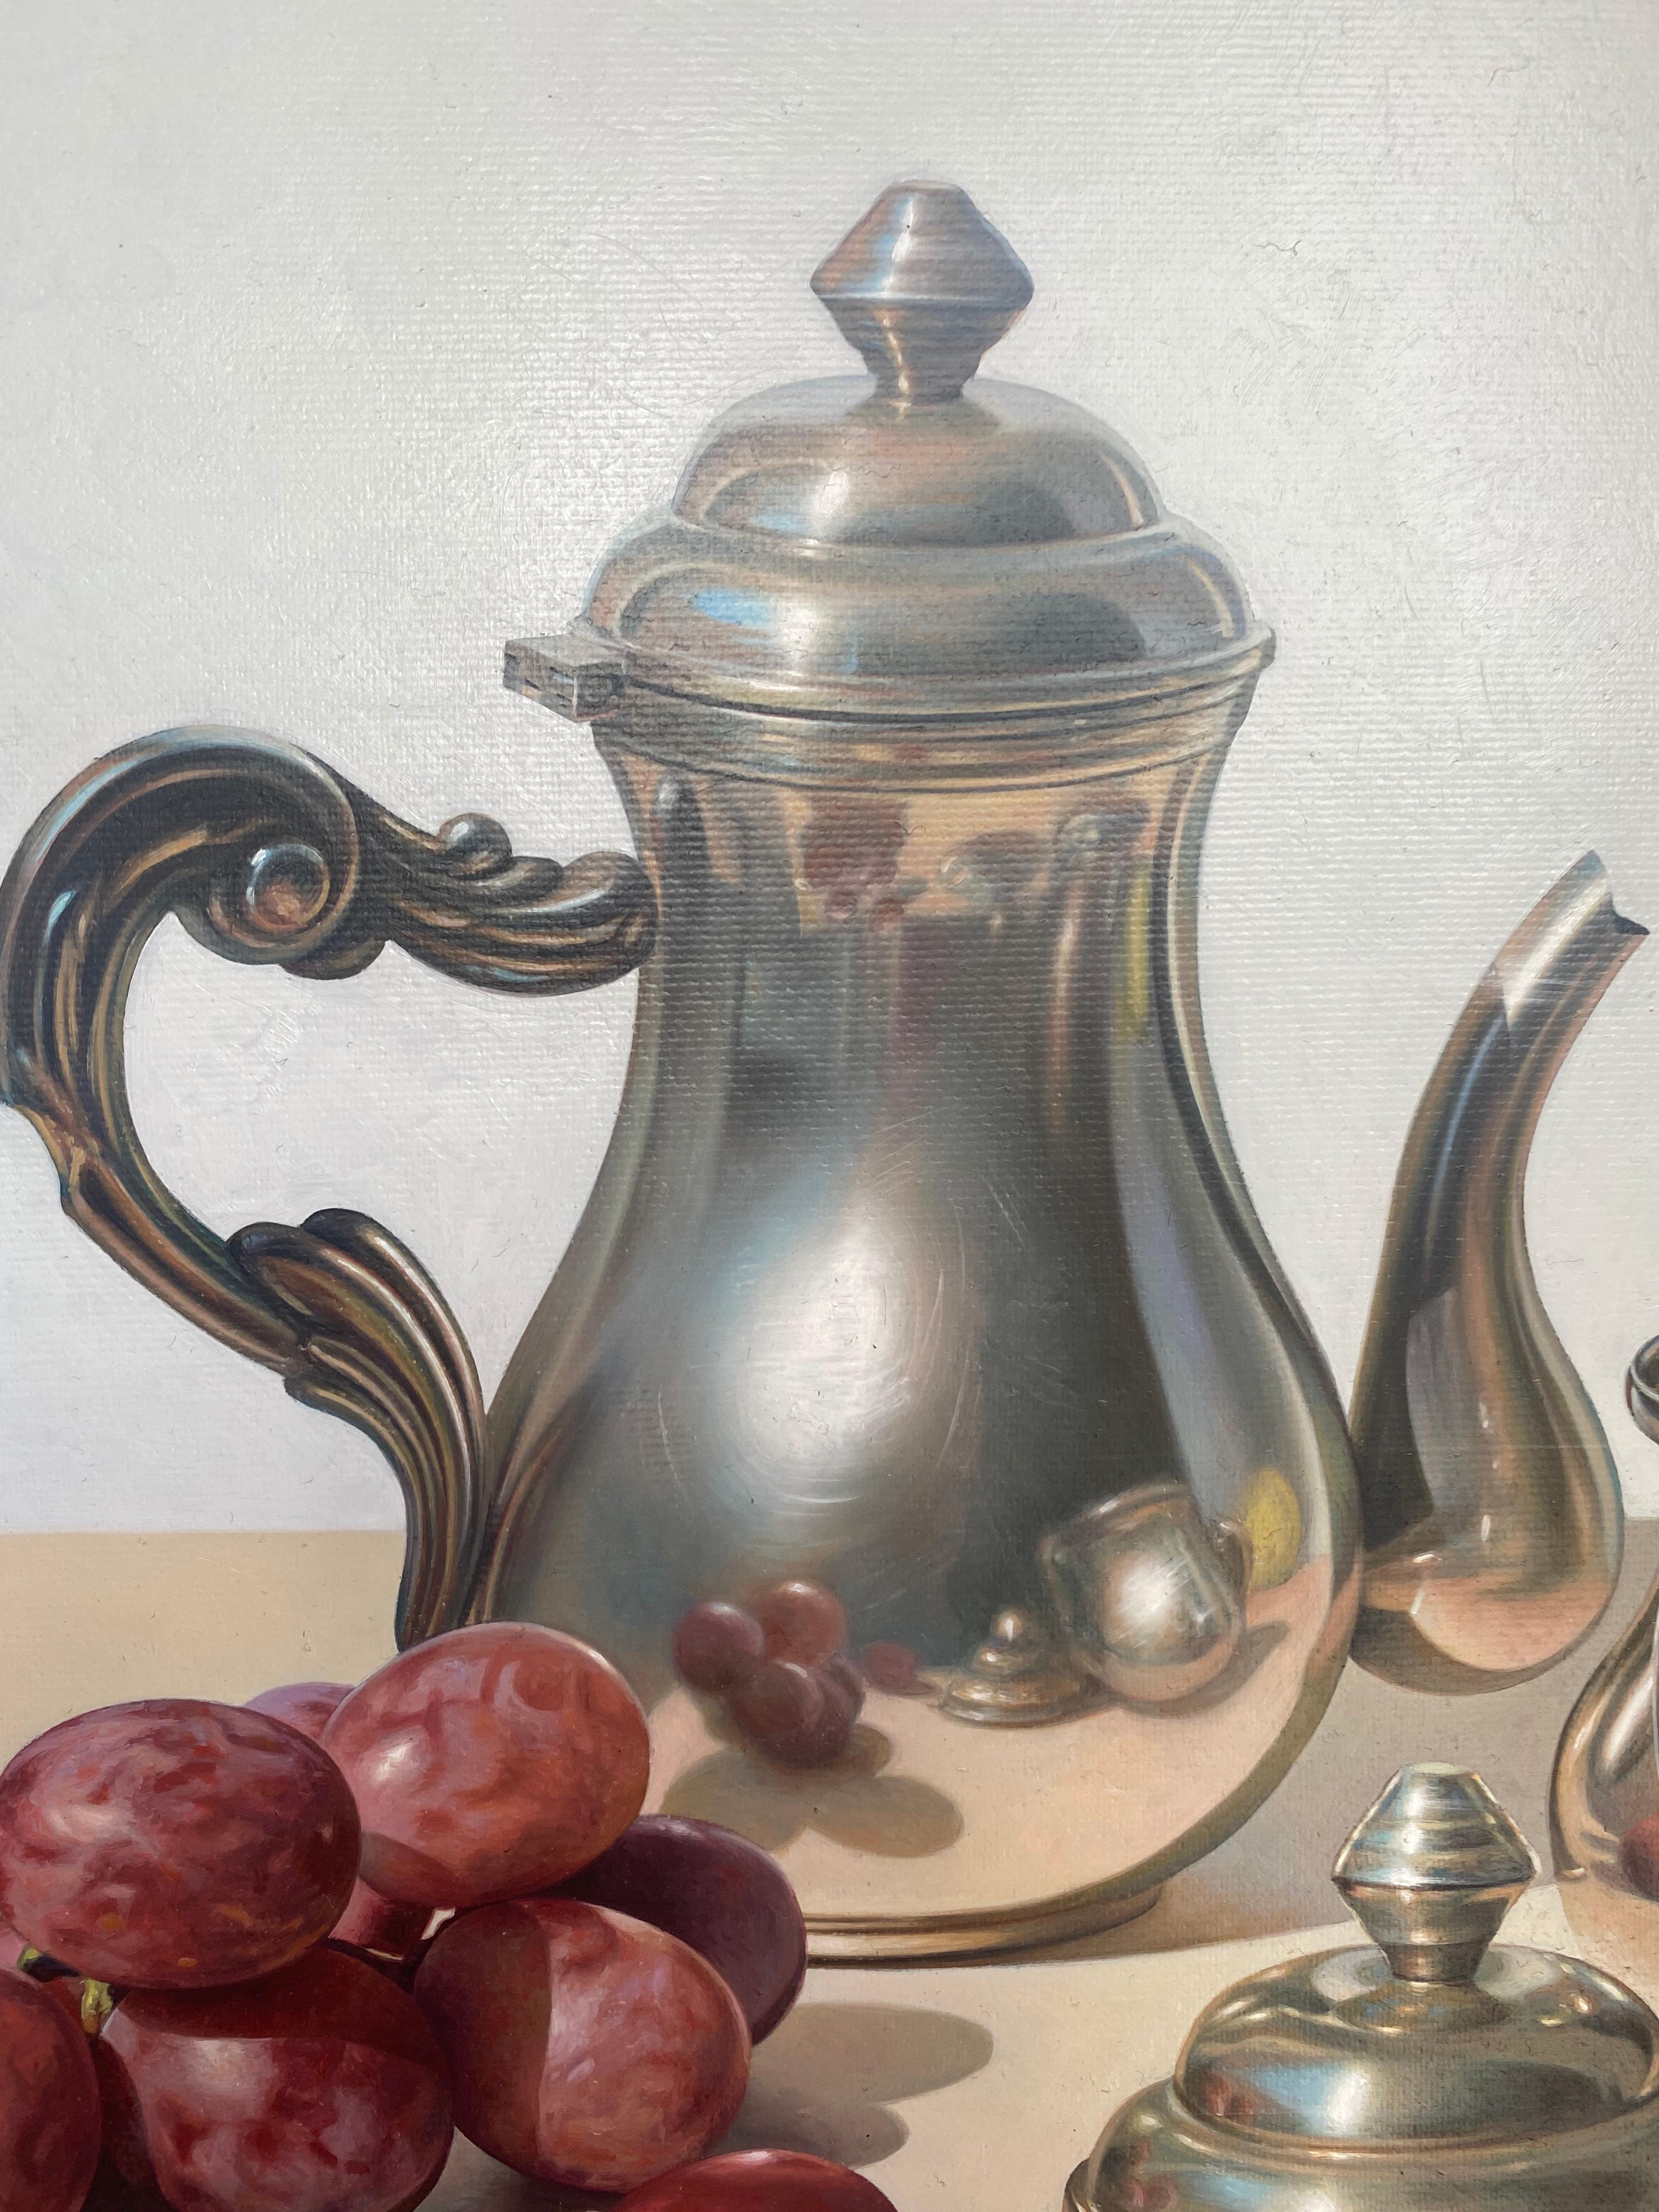 'Still Life with Grapes' Contemporary painting of Silverware, Coffee pot & Fruit - Photorealist Painting by Manolo Higueras